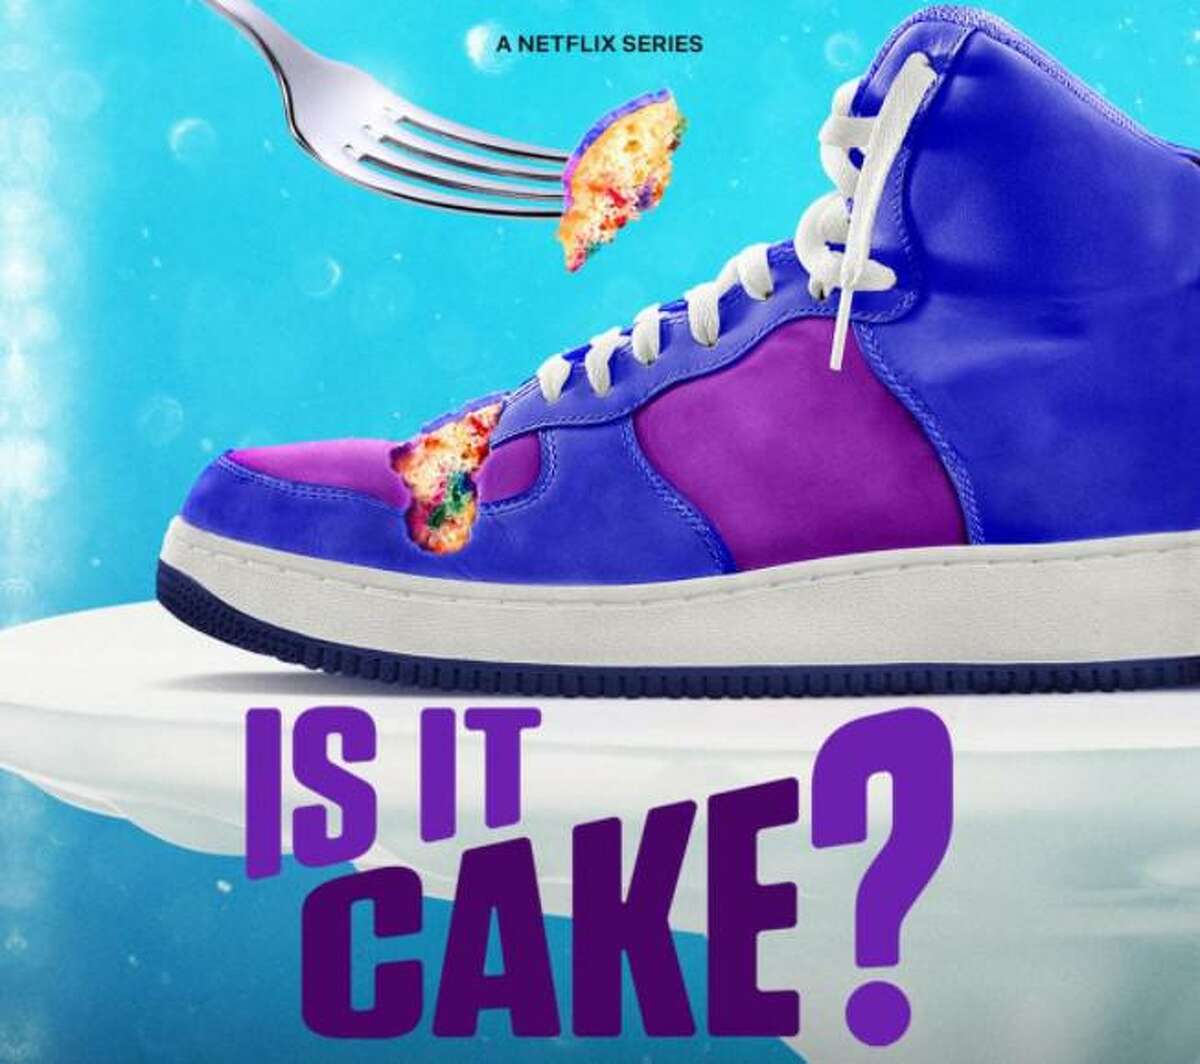 "Is it Cake?" airs March 18, 2022 on Netflix.